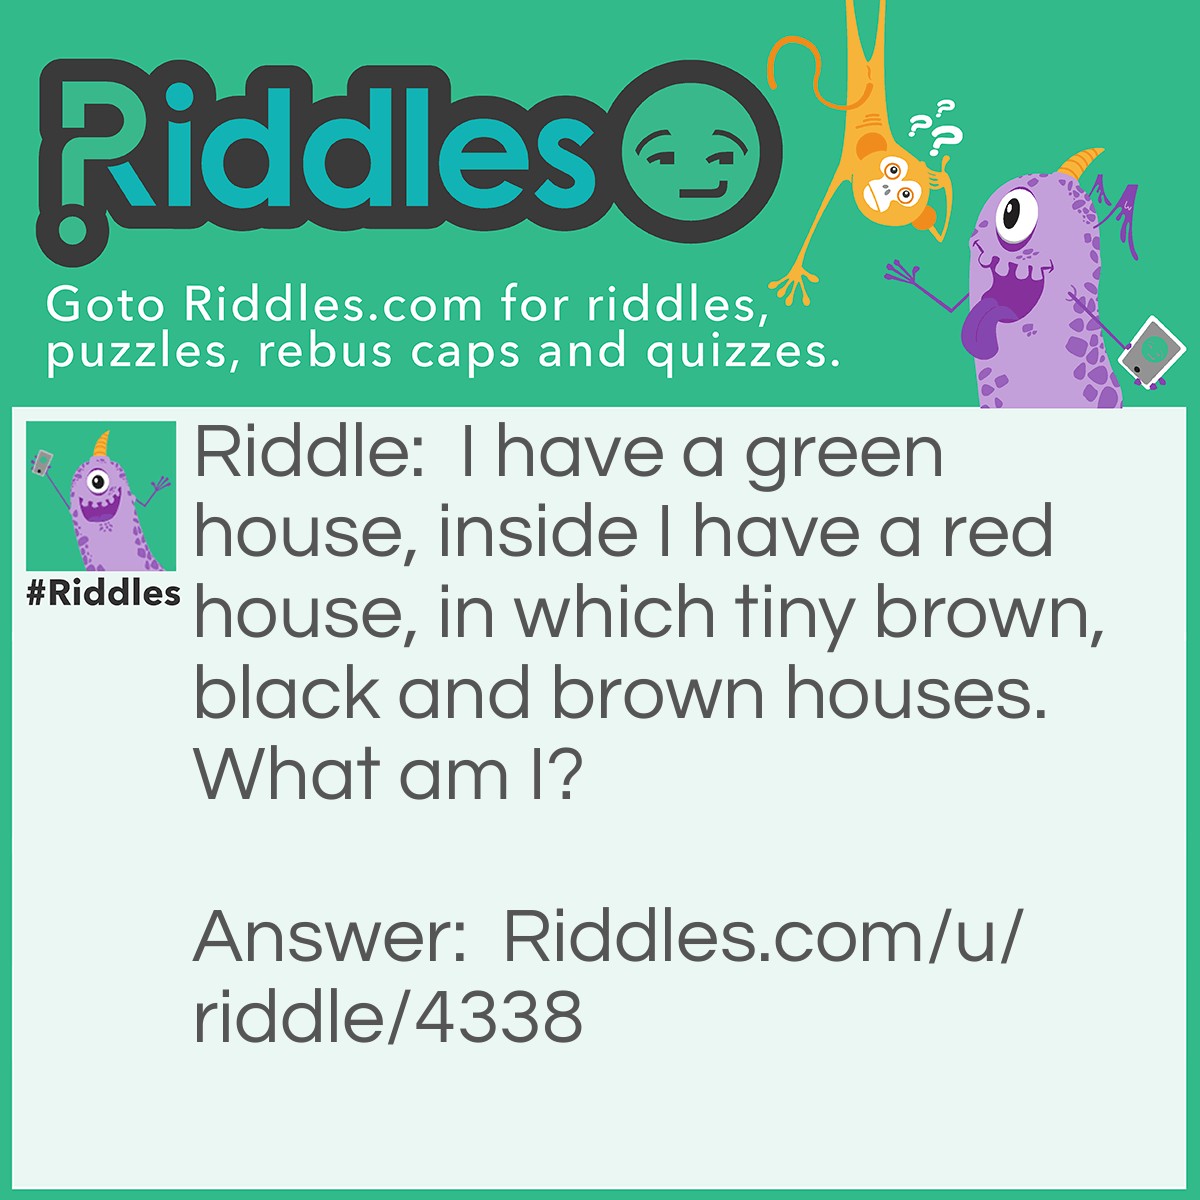 Riddle: I have a green house, inside I have a red house, in which tiny brown, black and brown houses. What am I? Answer: A watermelon.